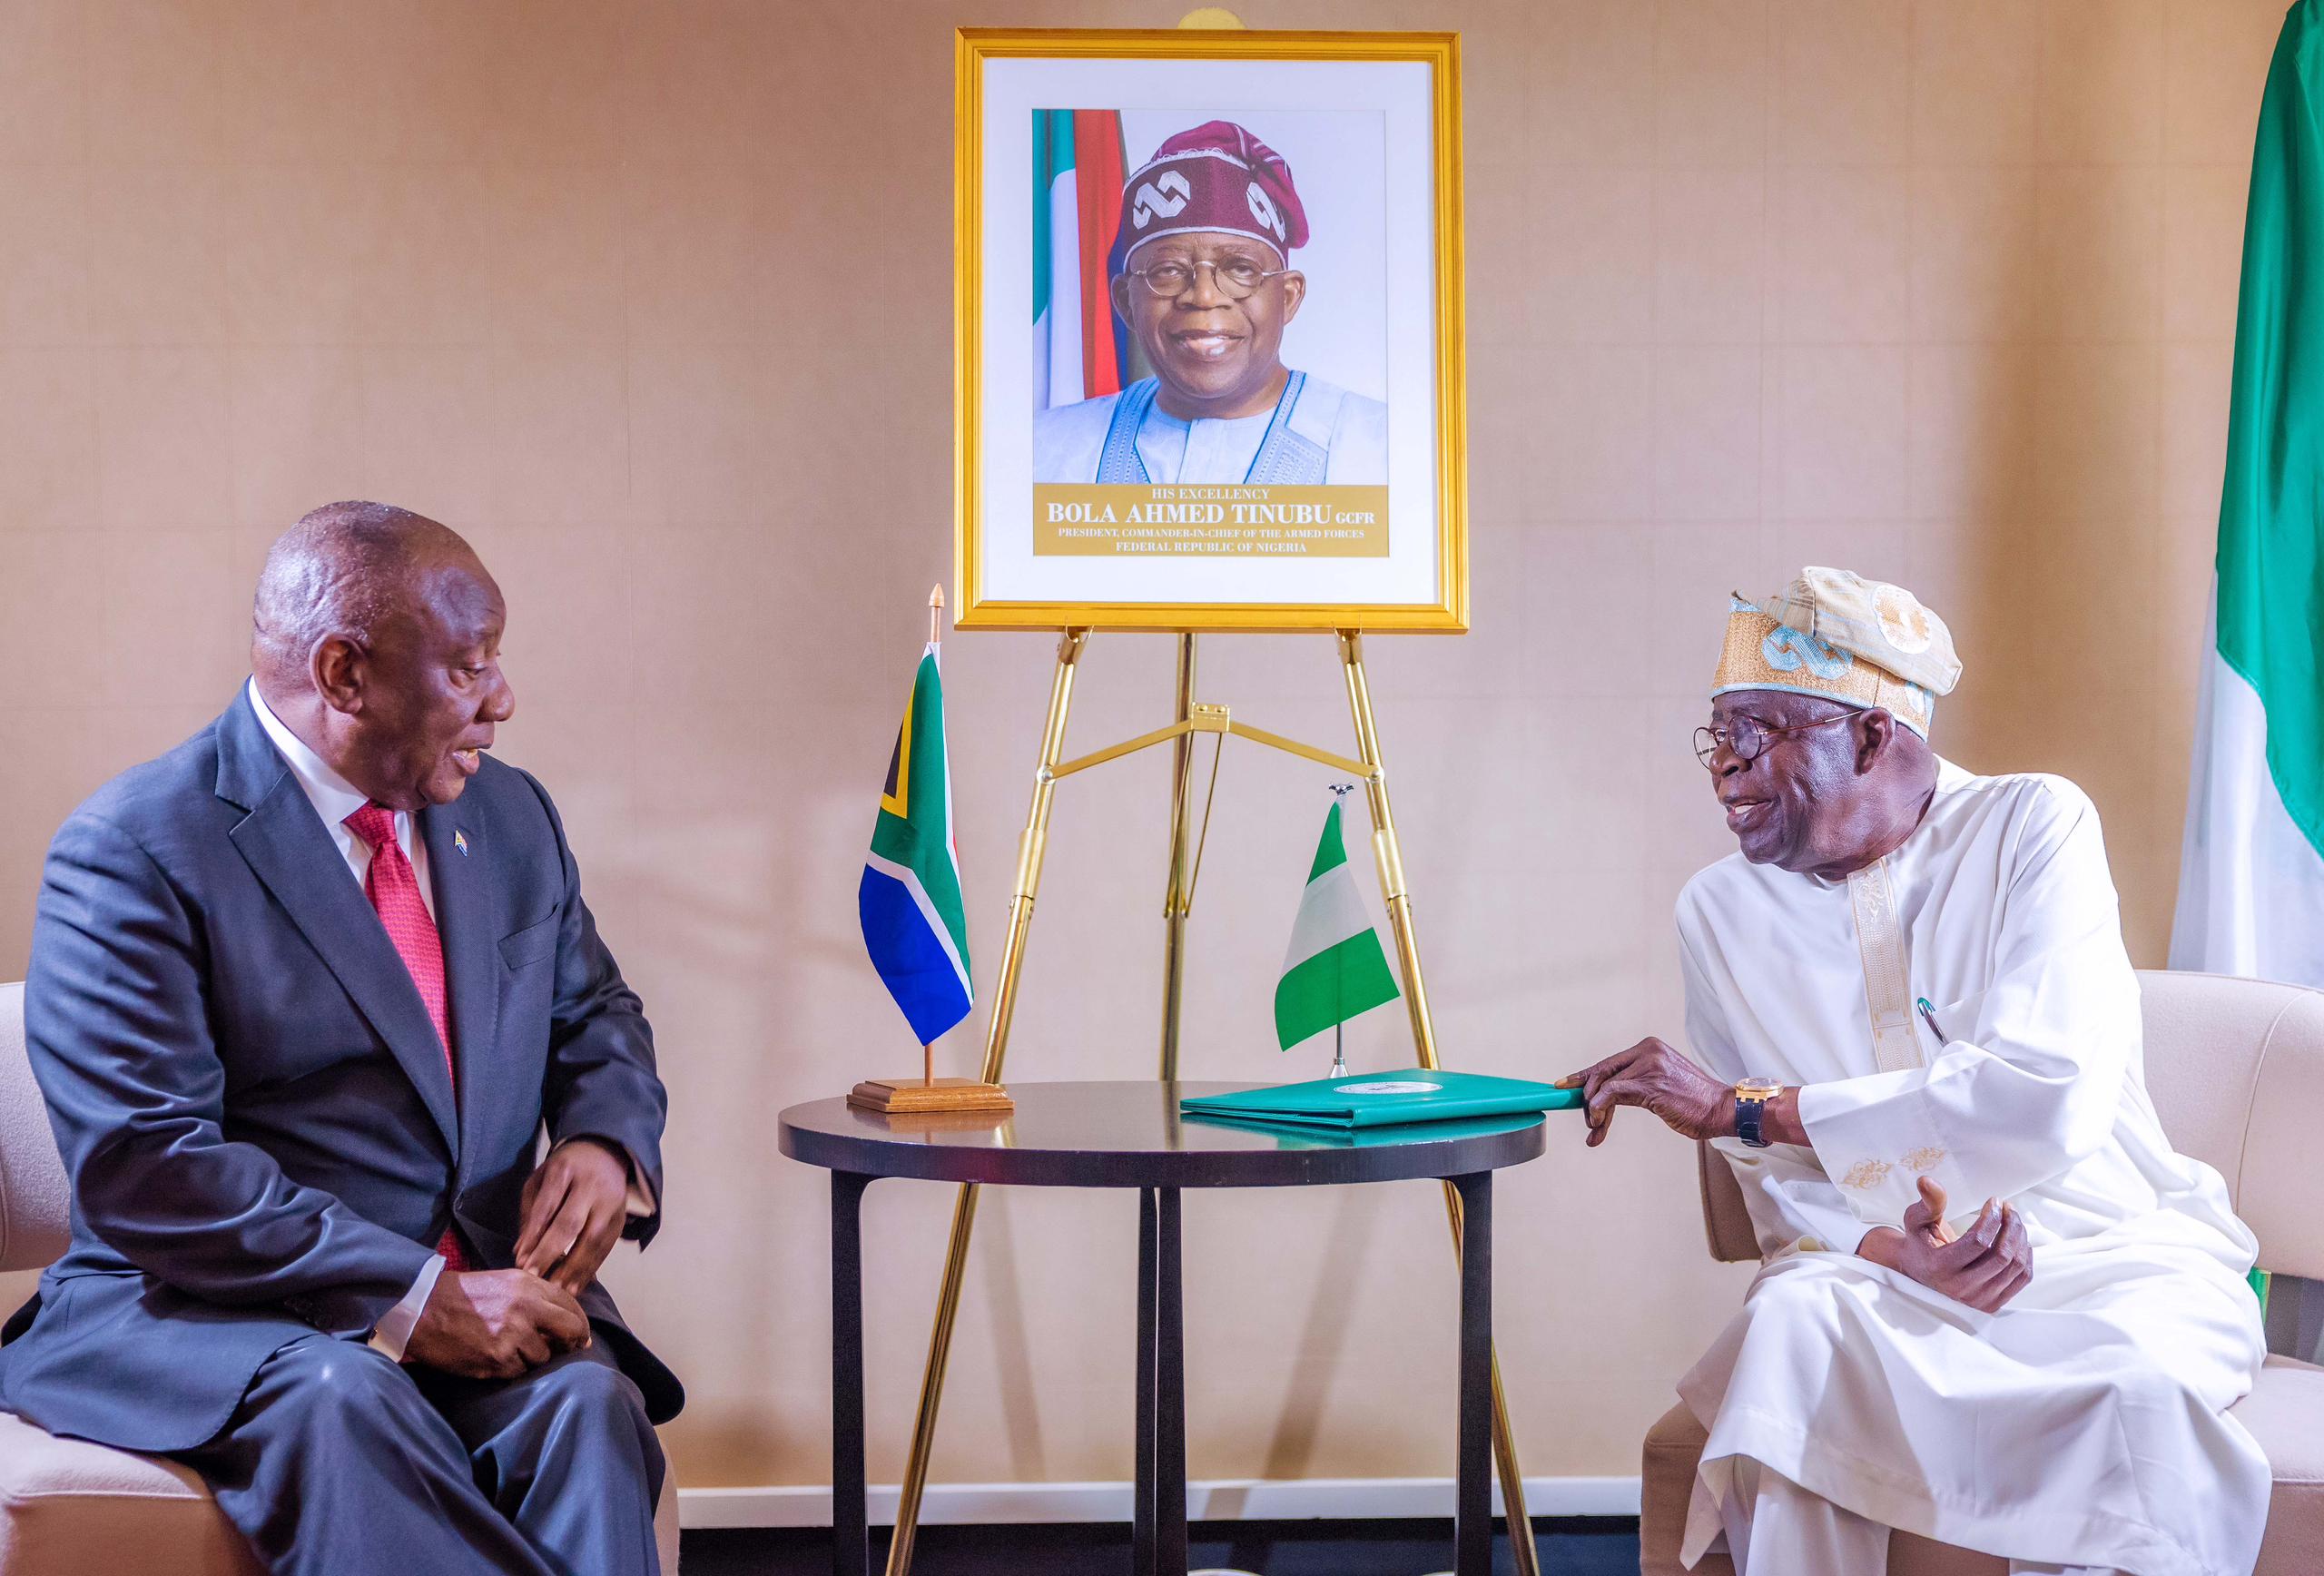 PRESIDENT TINUBU ADVANCES STRONGER ECONOMIC TIES WITH SOUTH AFRICA